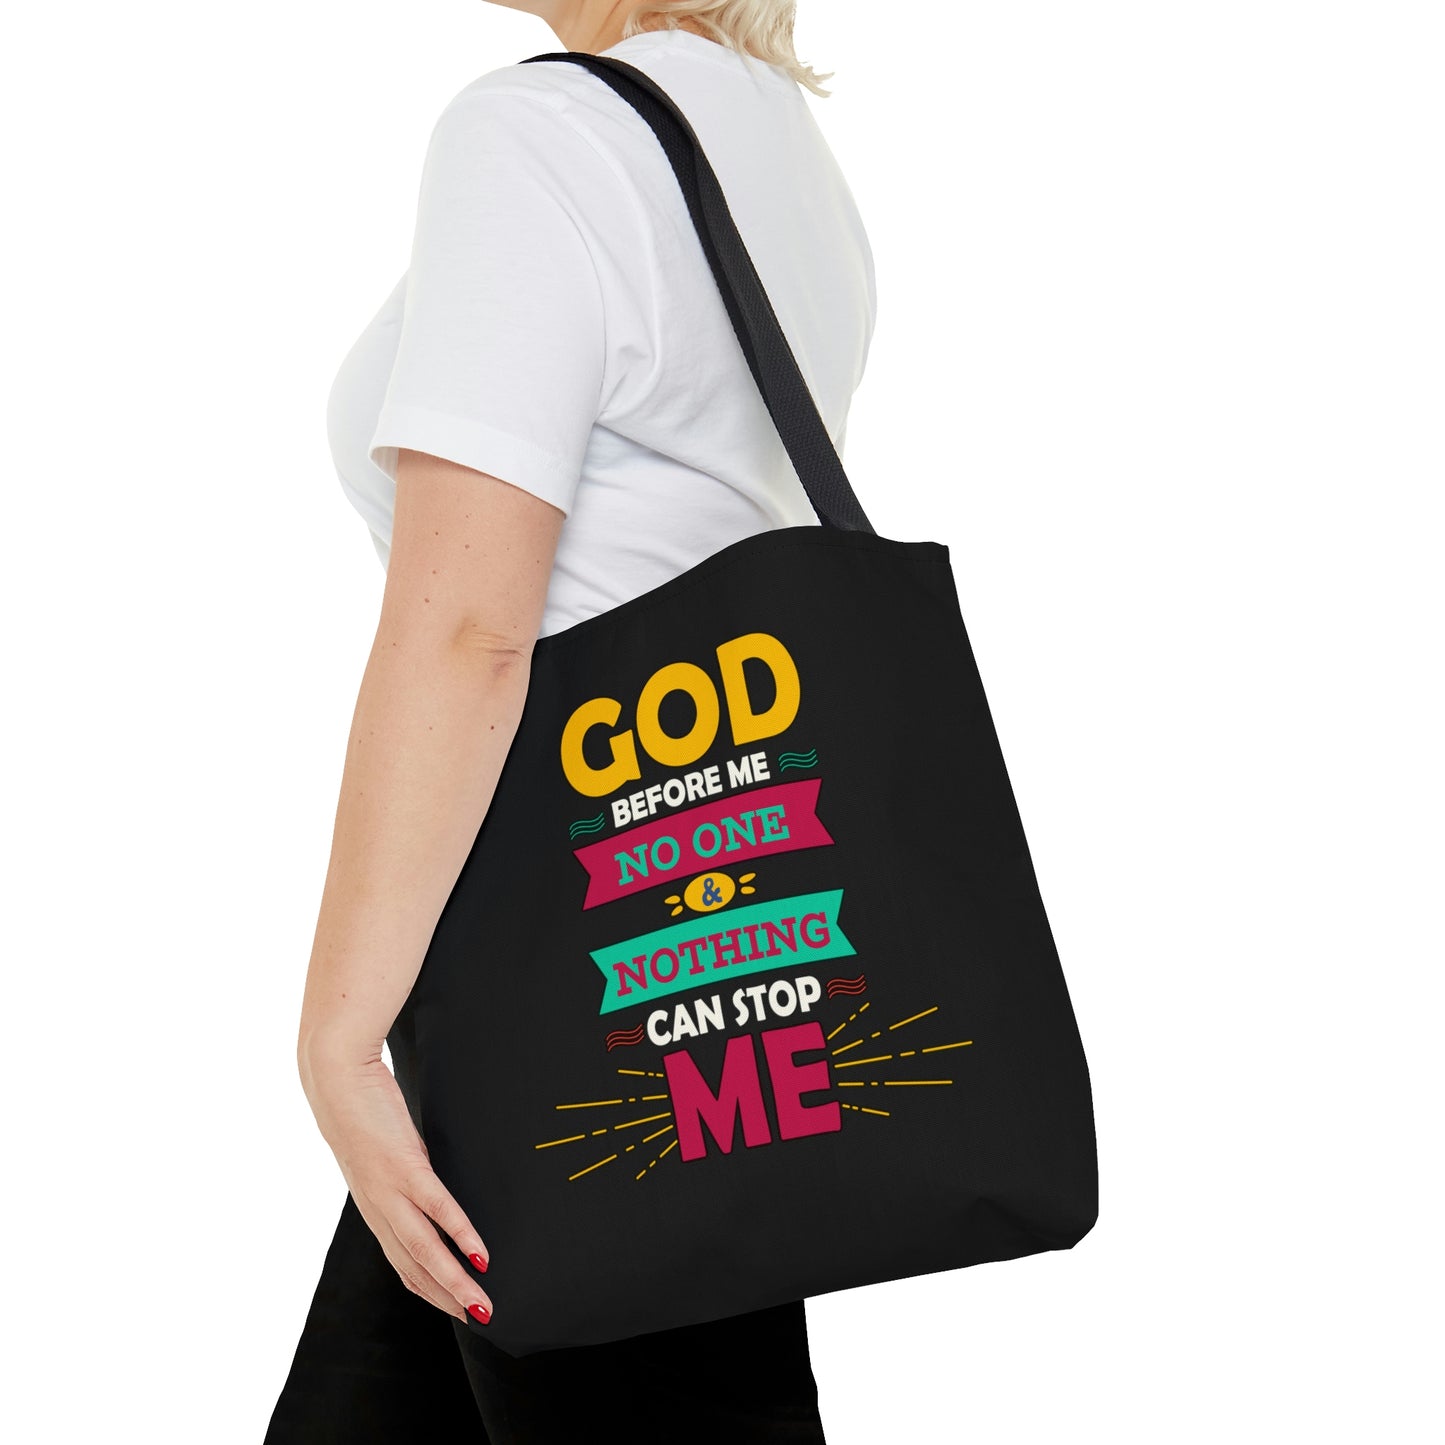 God Before Me No One & Nothing Can Stop Me Tote Bag